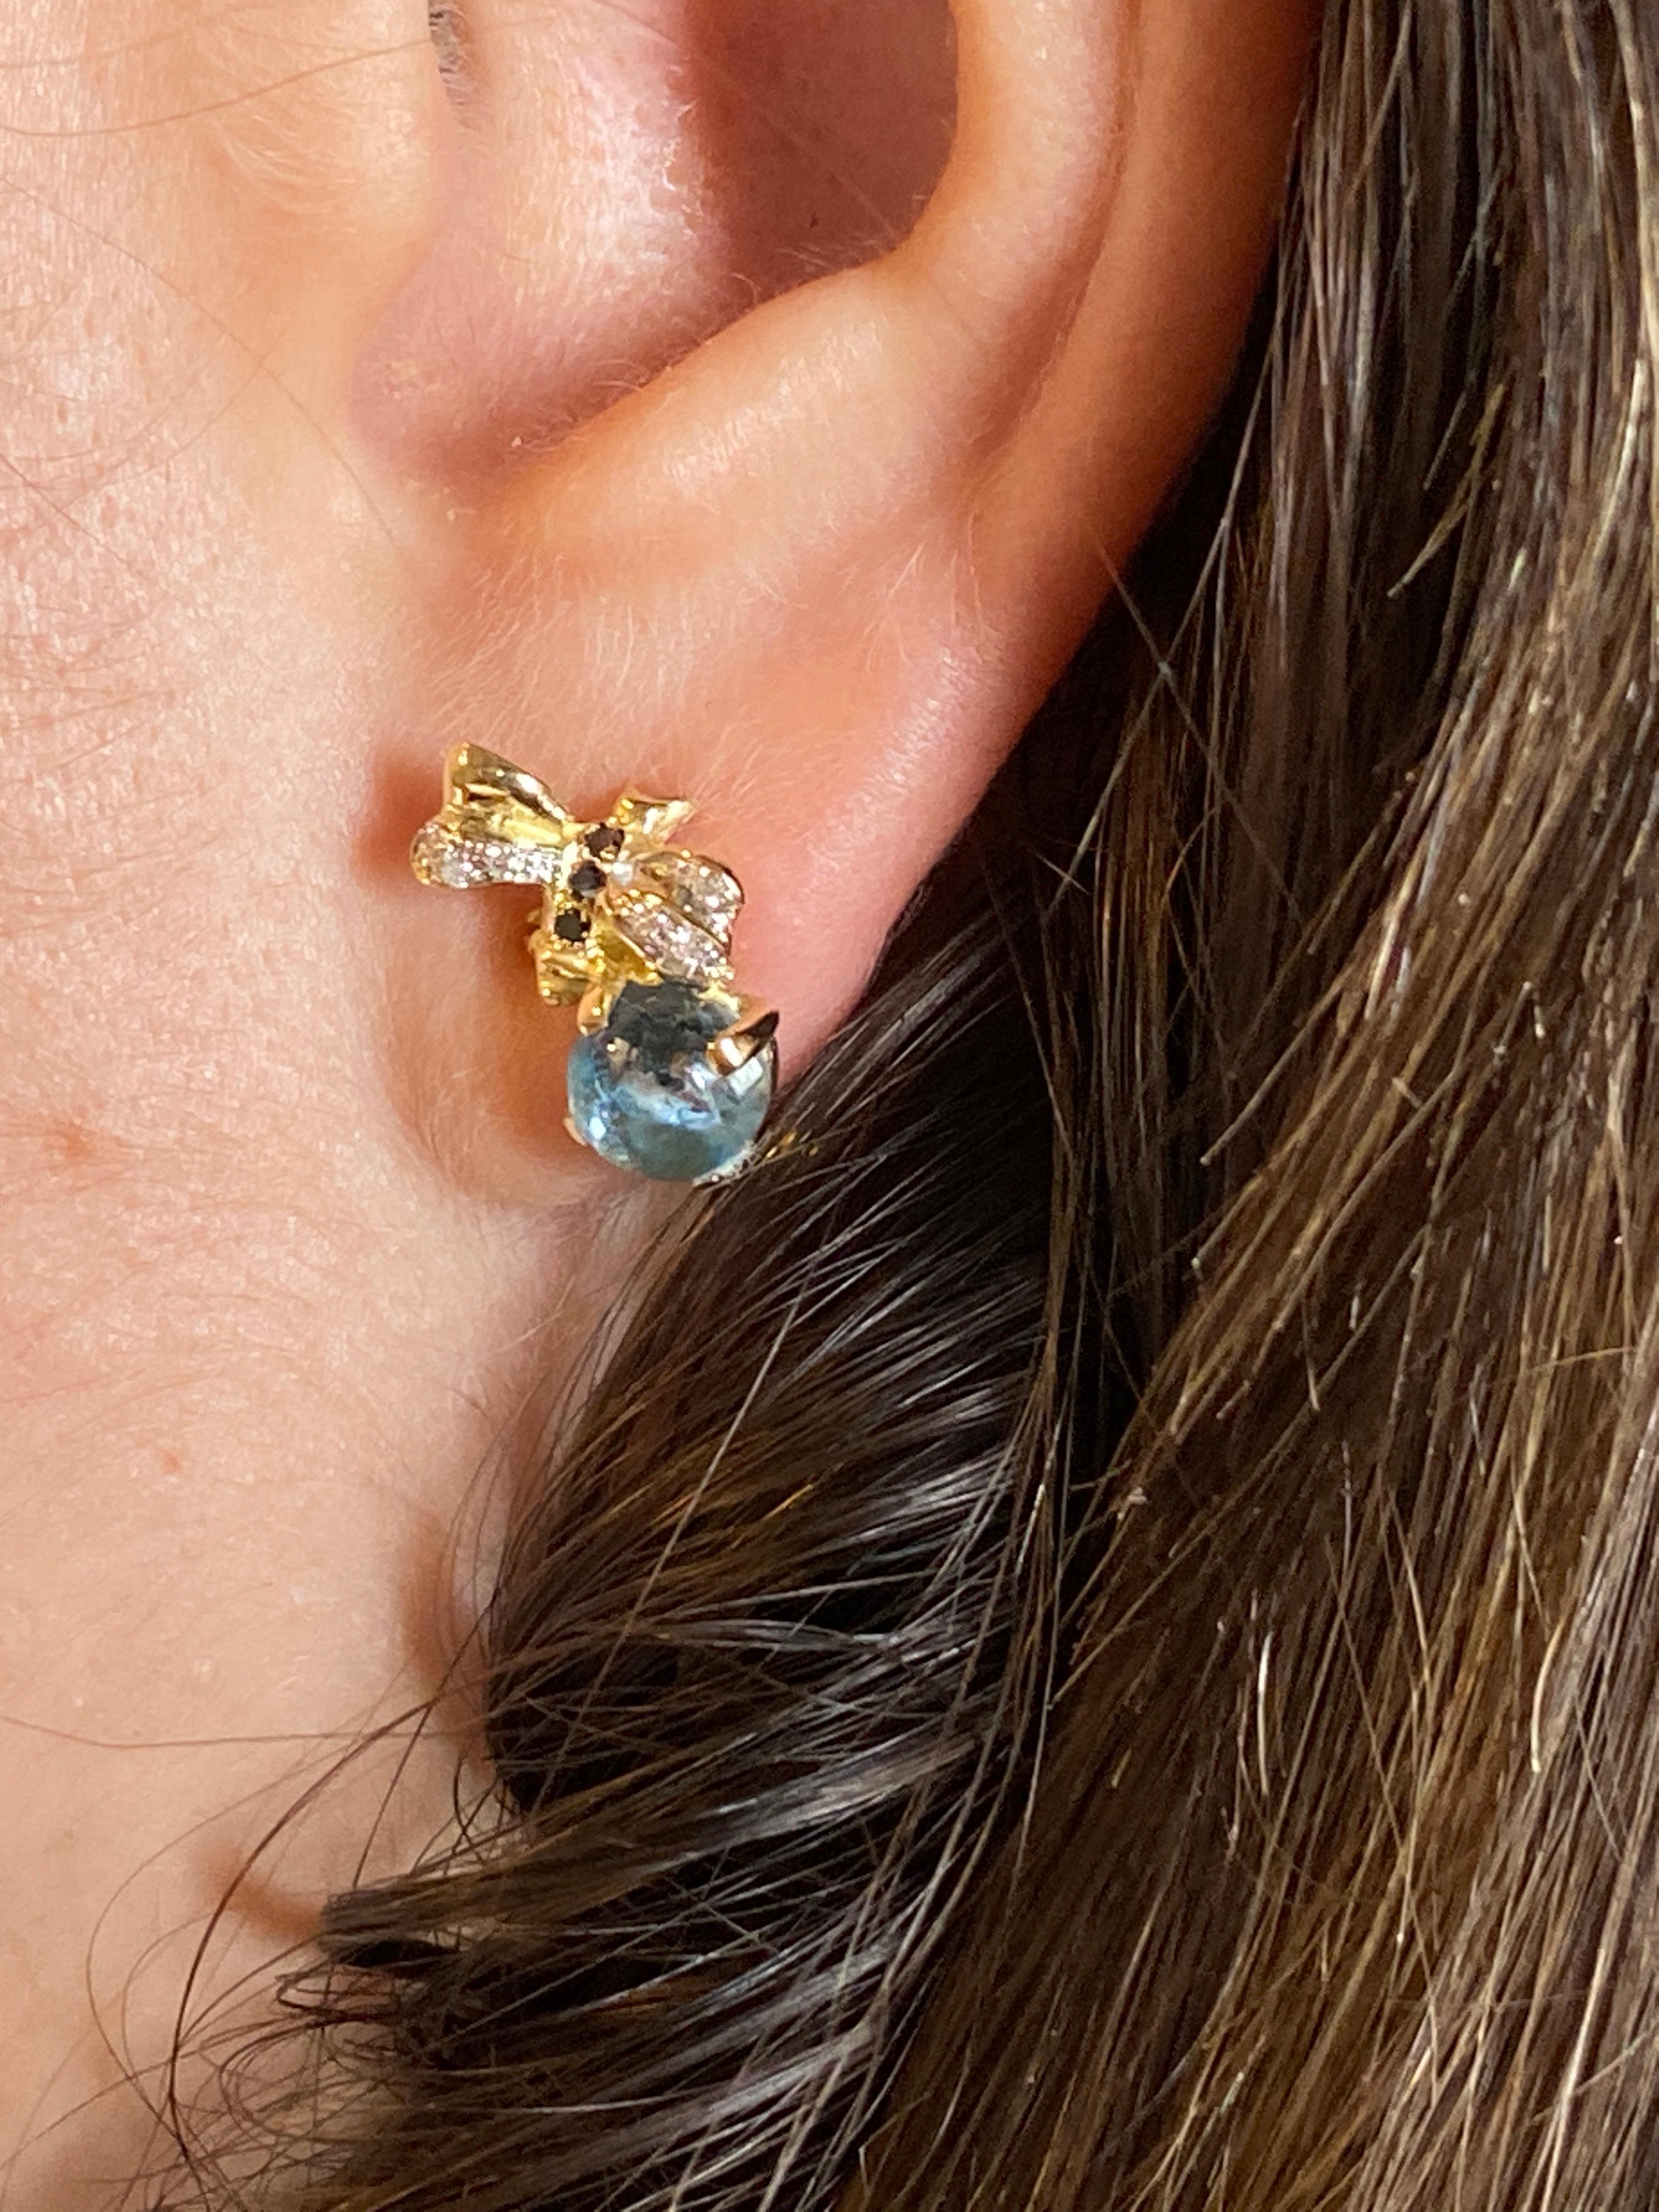 
ChatGPT
ChatGPT
Unveiling Rossella Ugolini's Exclusive 18 Karat Yellow Gold Little Bees Stud Earrings, a testament to exquisite craftsmanship and elegant design.

Handcrafted in Italy, these stud earrings feature a mesmerizing Round Cut 2.16 Carat